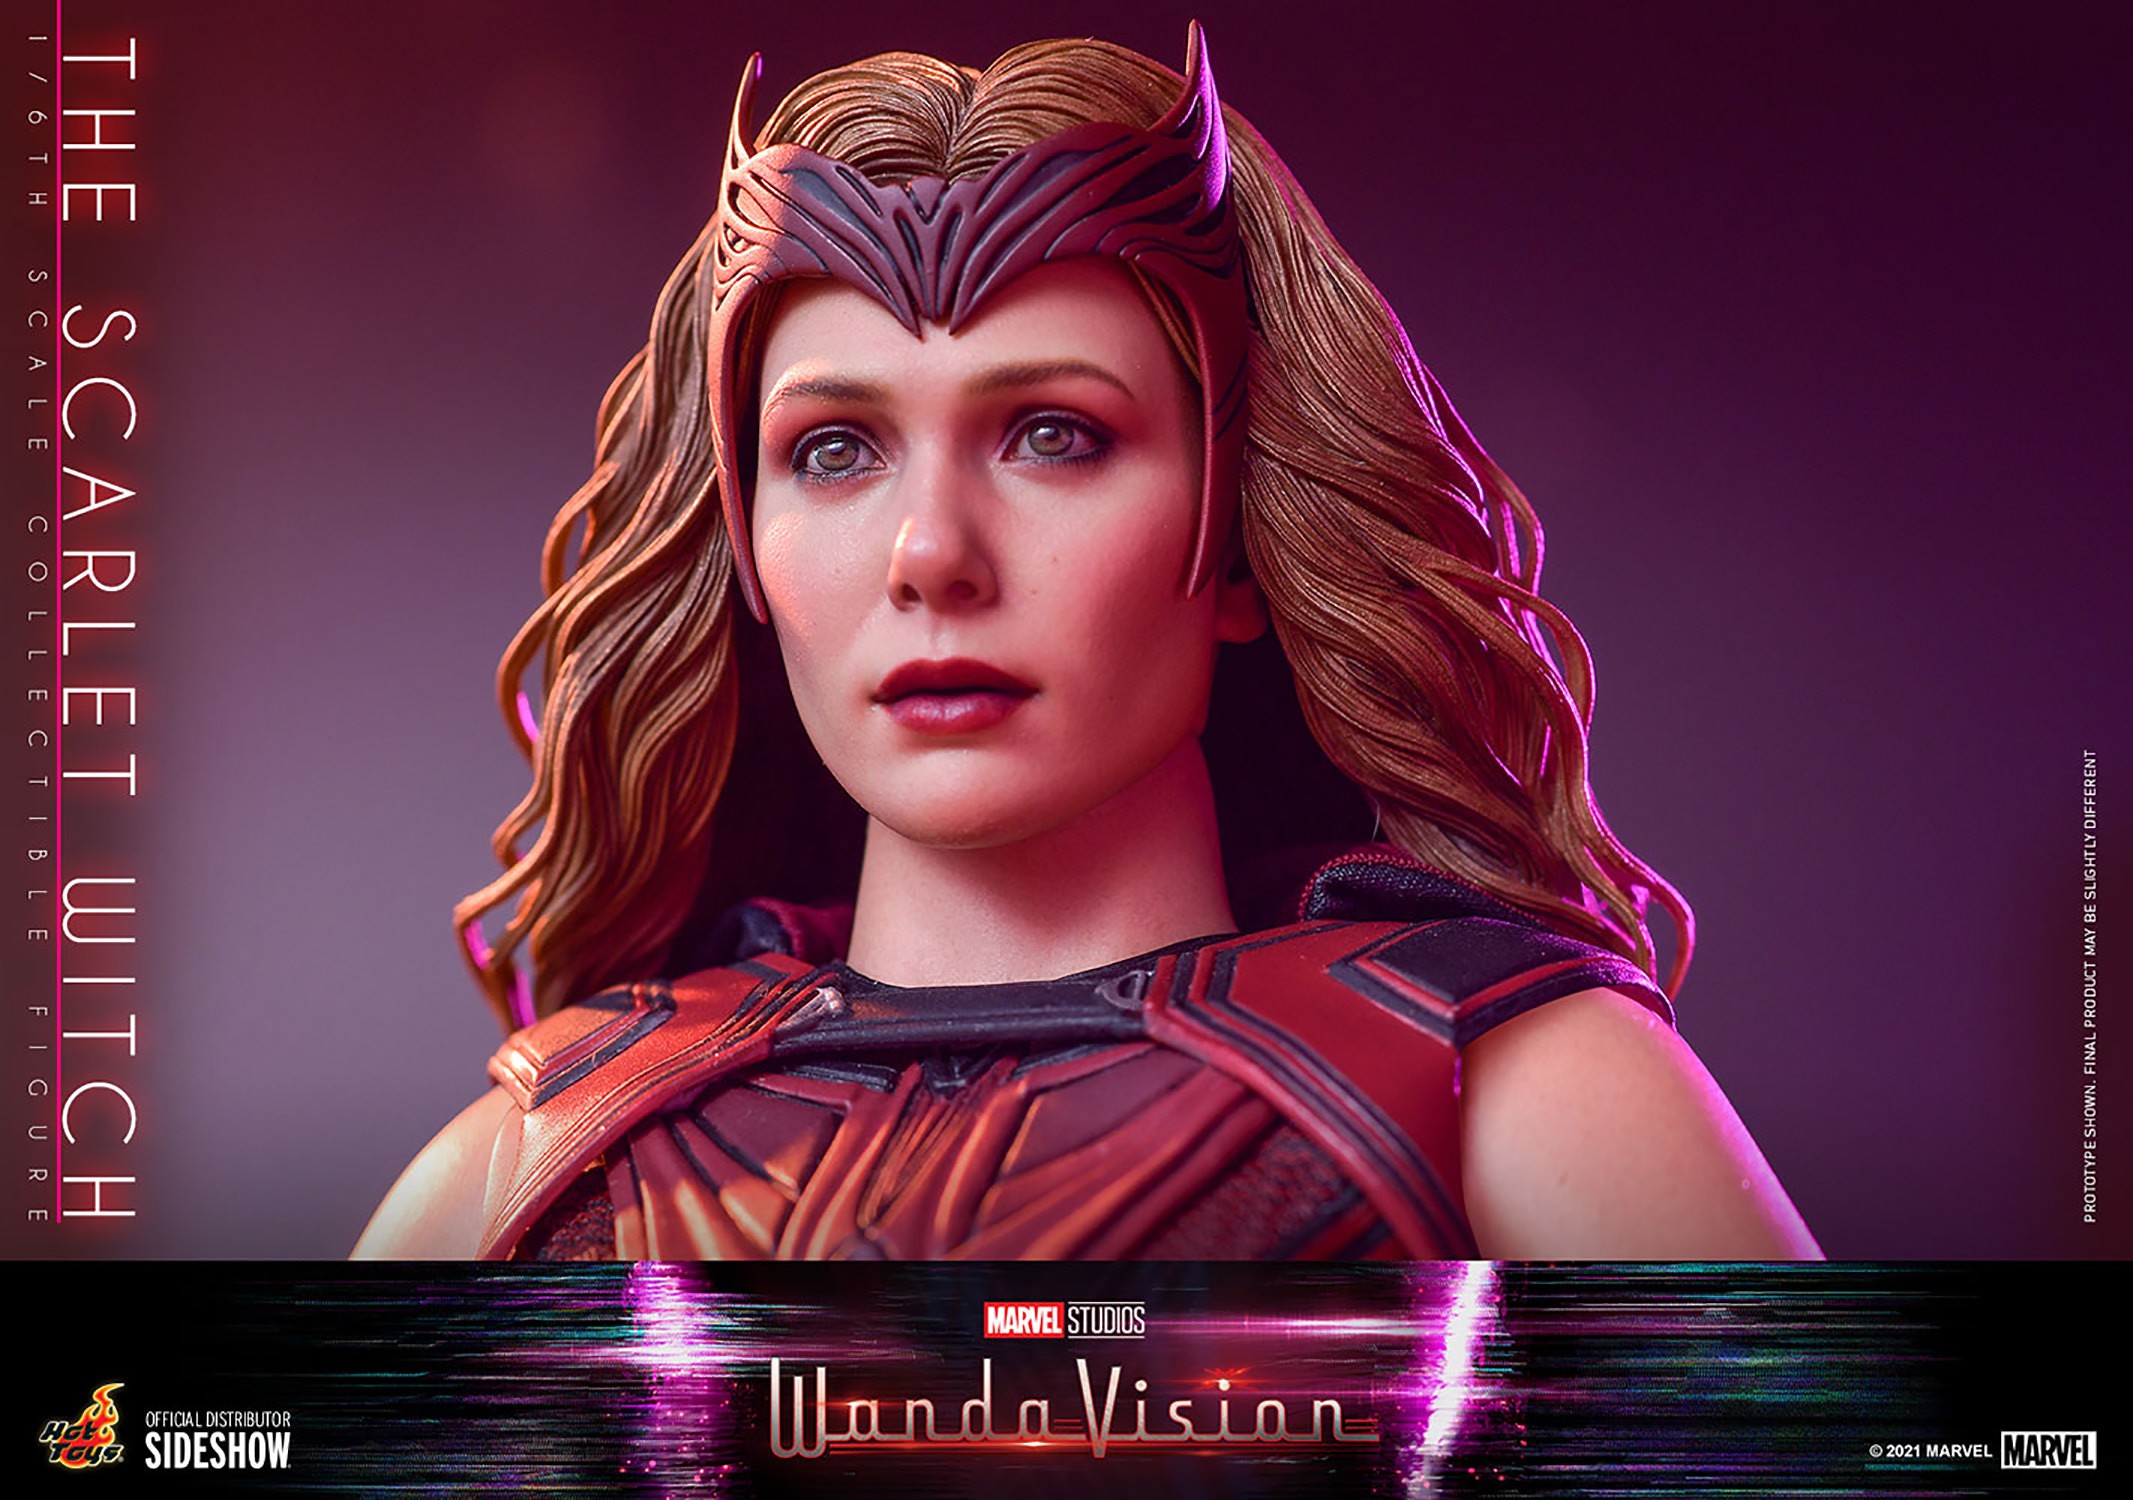 The Scarlet Witch- Prototype Shown